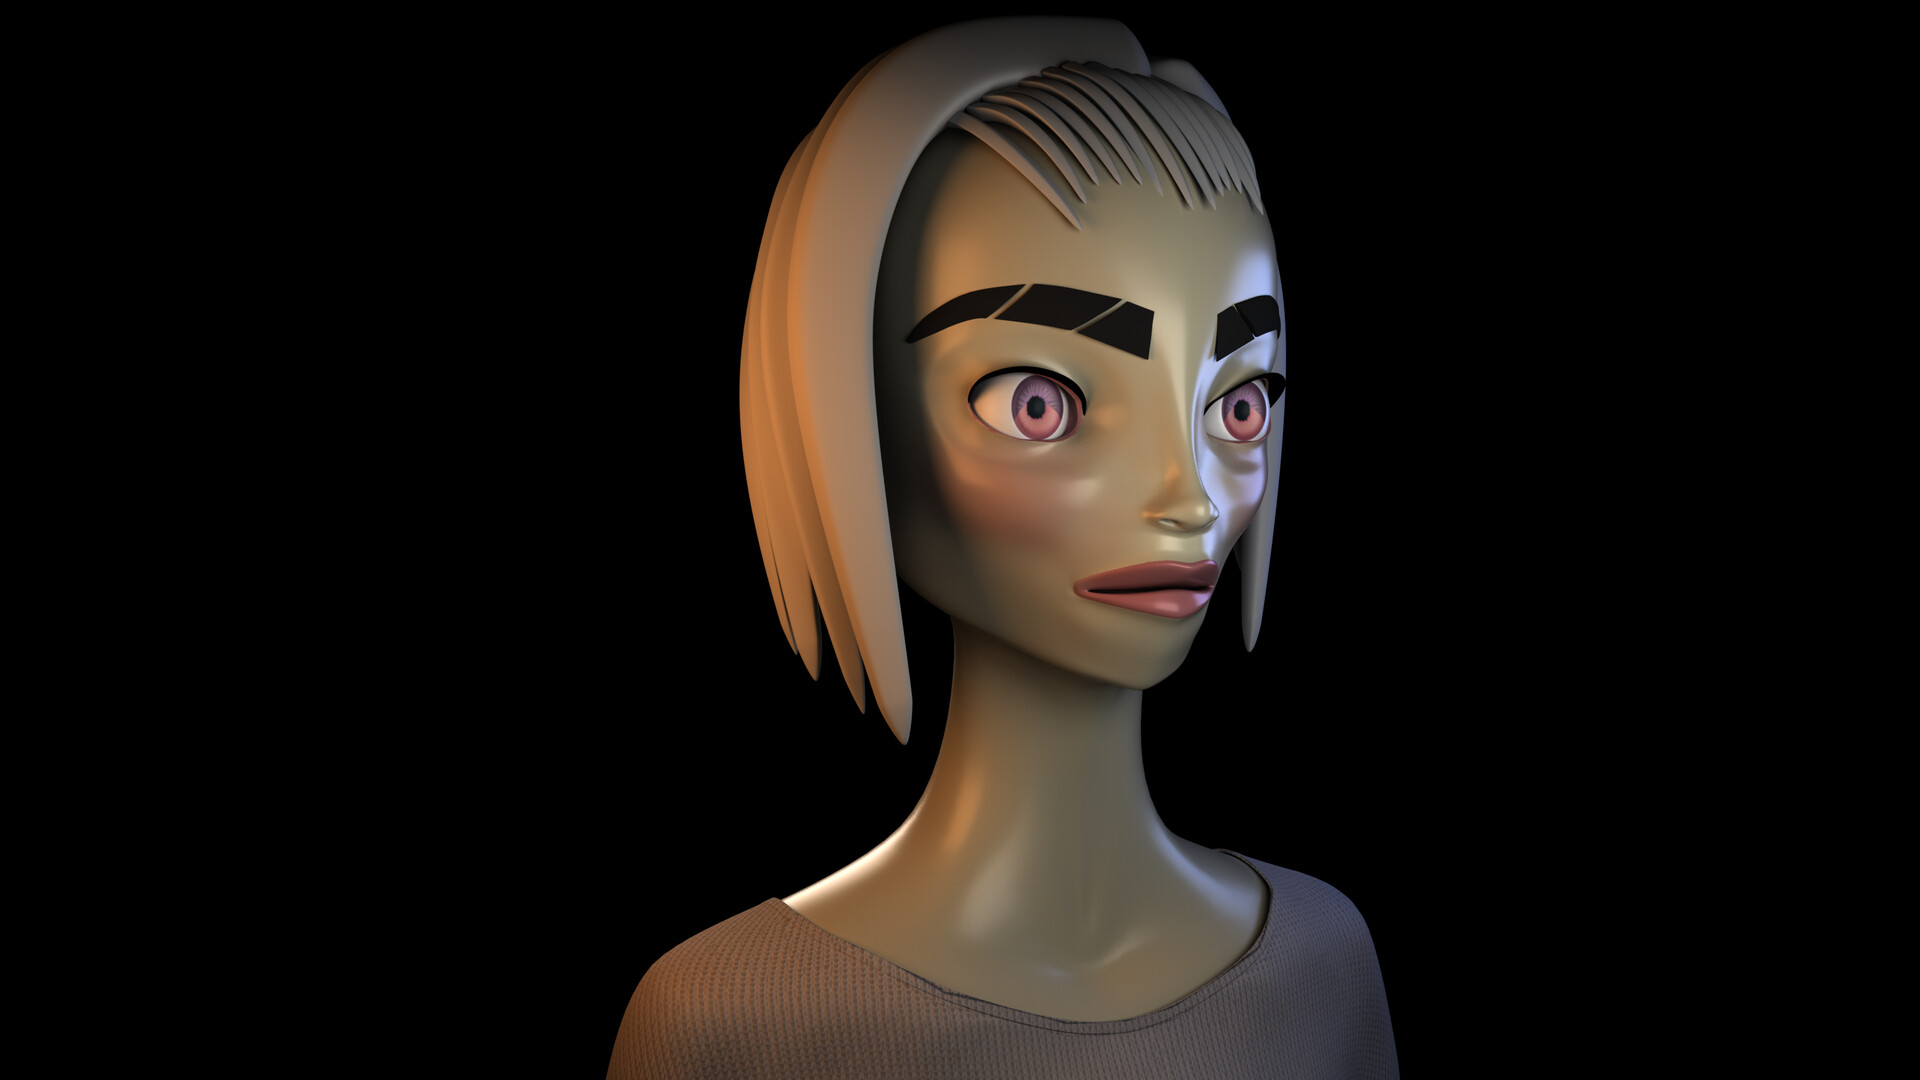 ArtStation - My first 3D Character Model